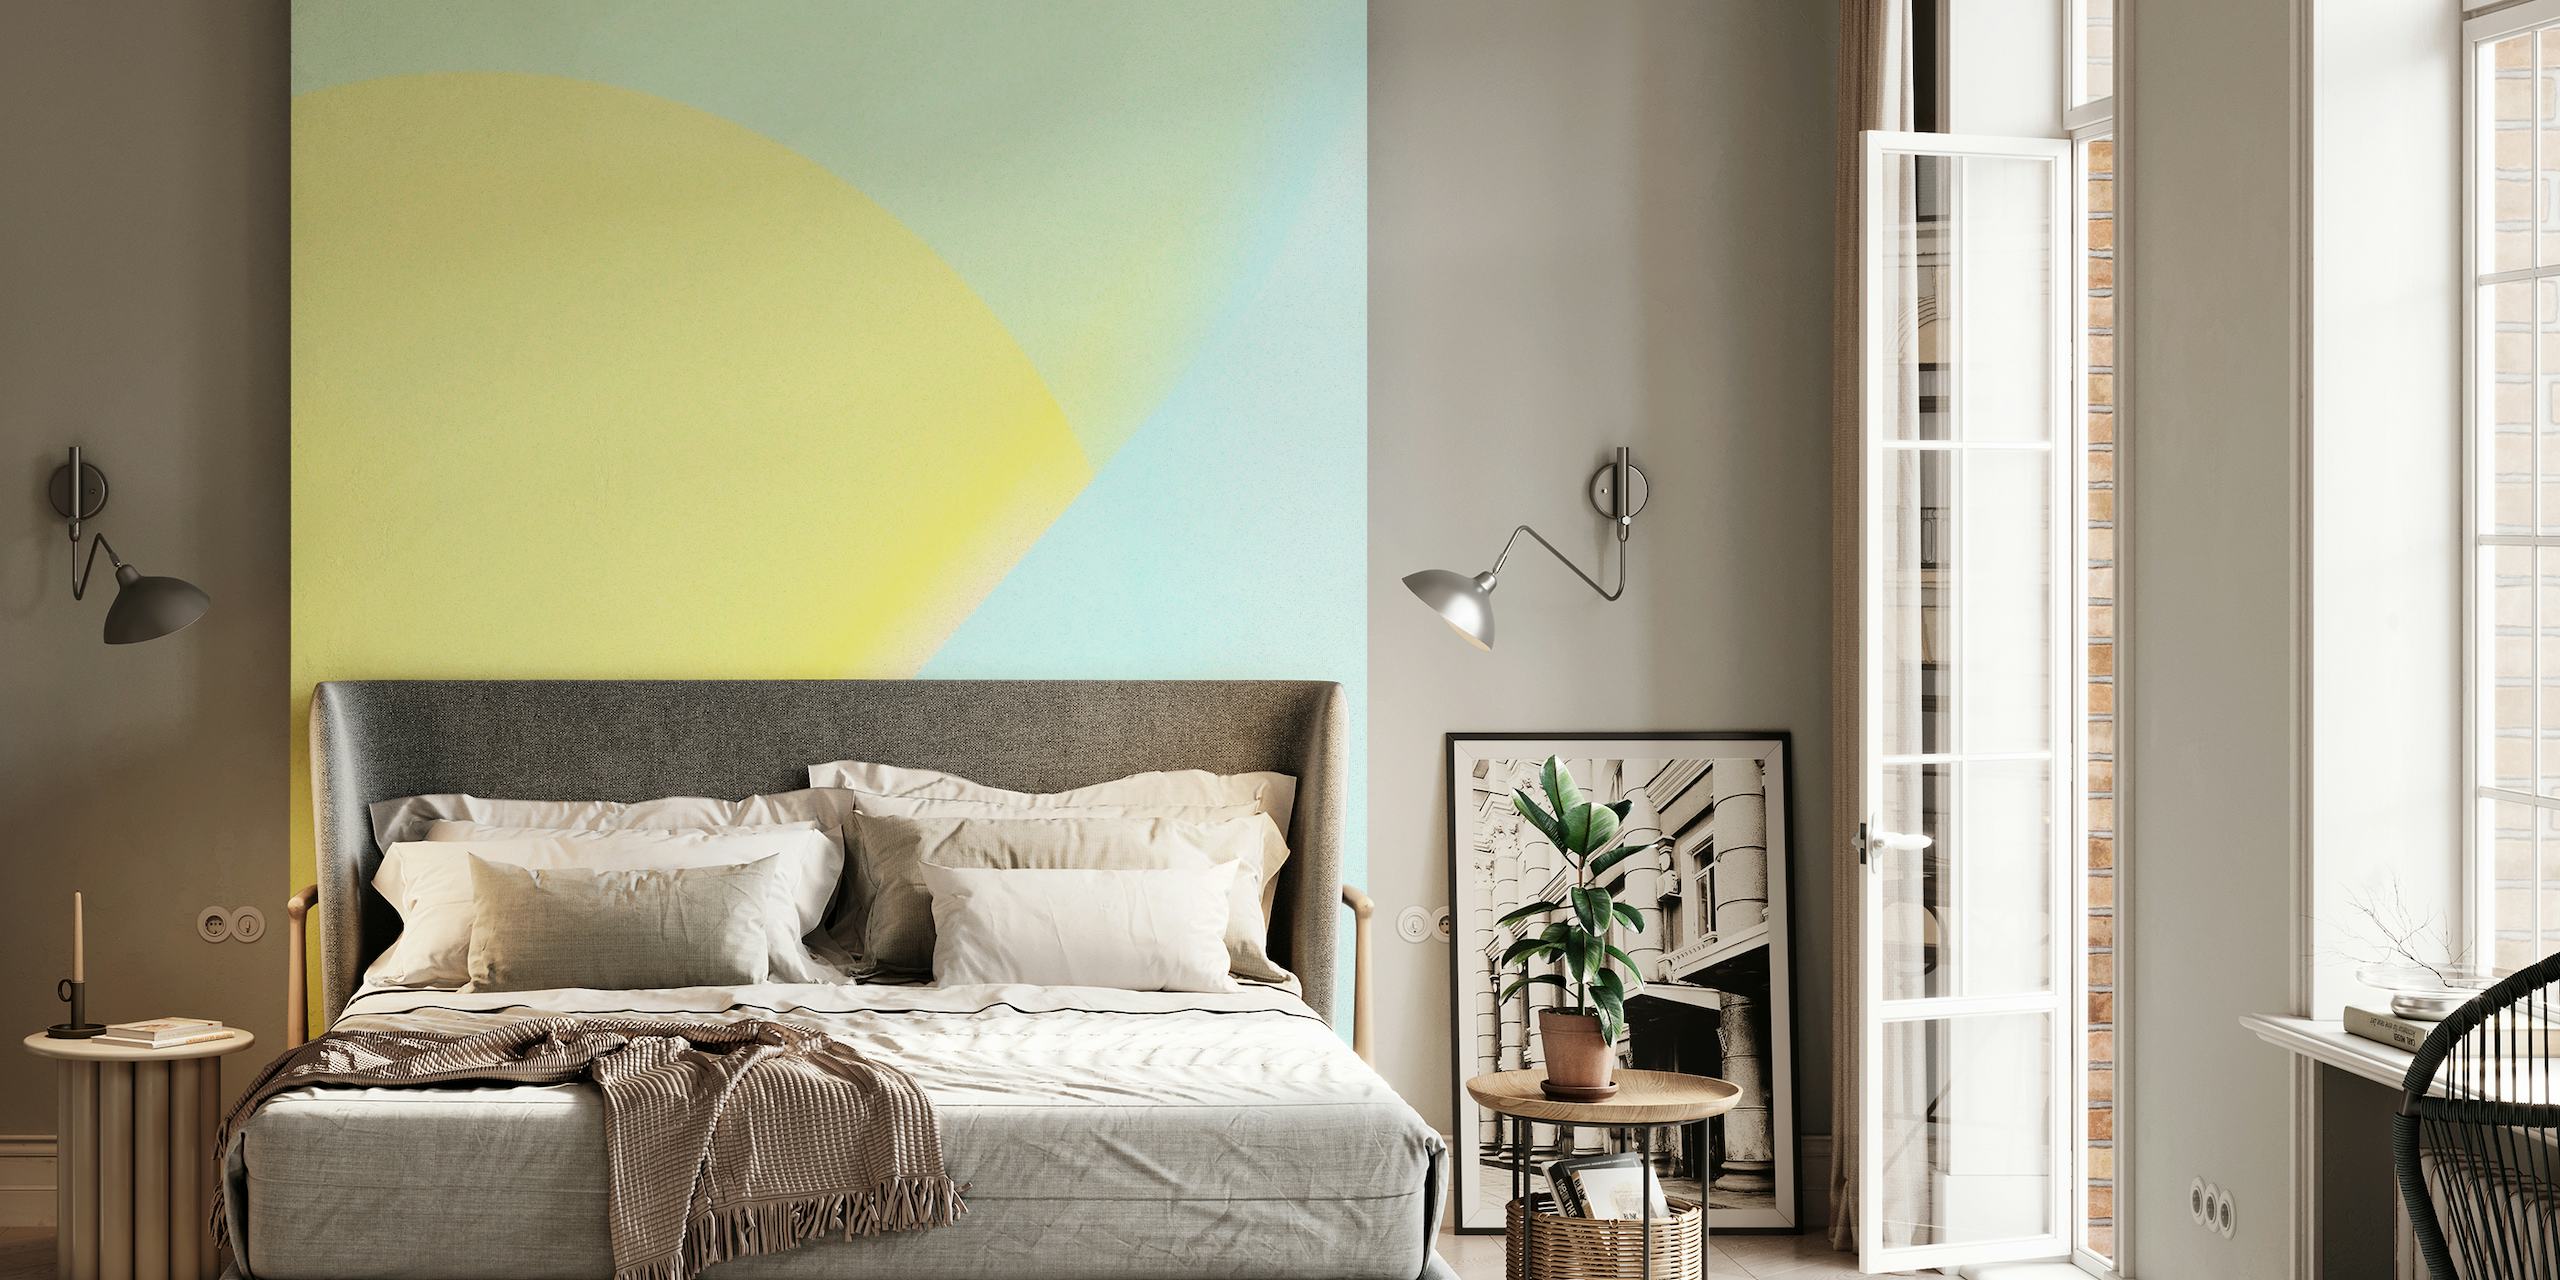 Abstract pastel yellow and blue gradient wall mural named Happiness v2.